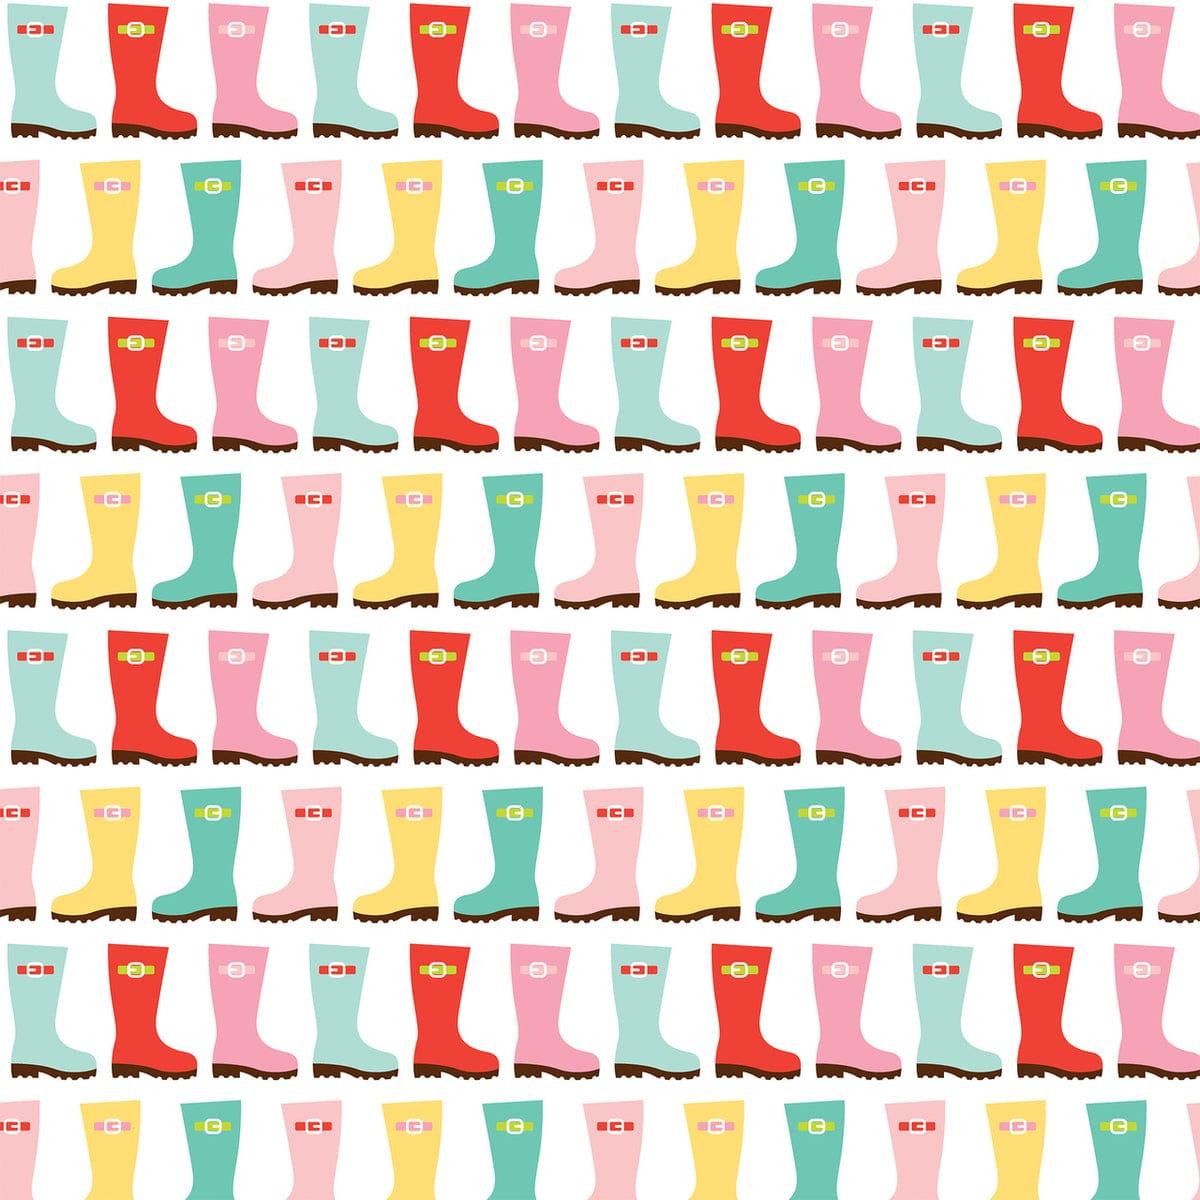 Spring Fling Collection Rainboots 12 x 12 Double-Sided Scrapbook Paper by Echo Park Paper - Scrapbook Supply Companies